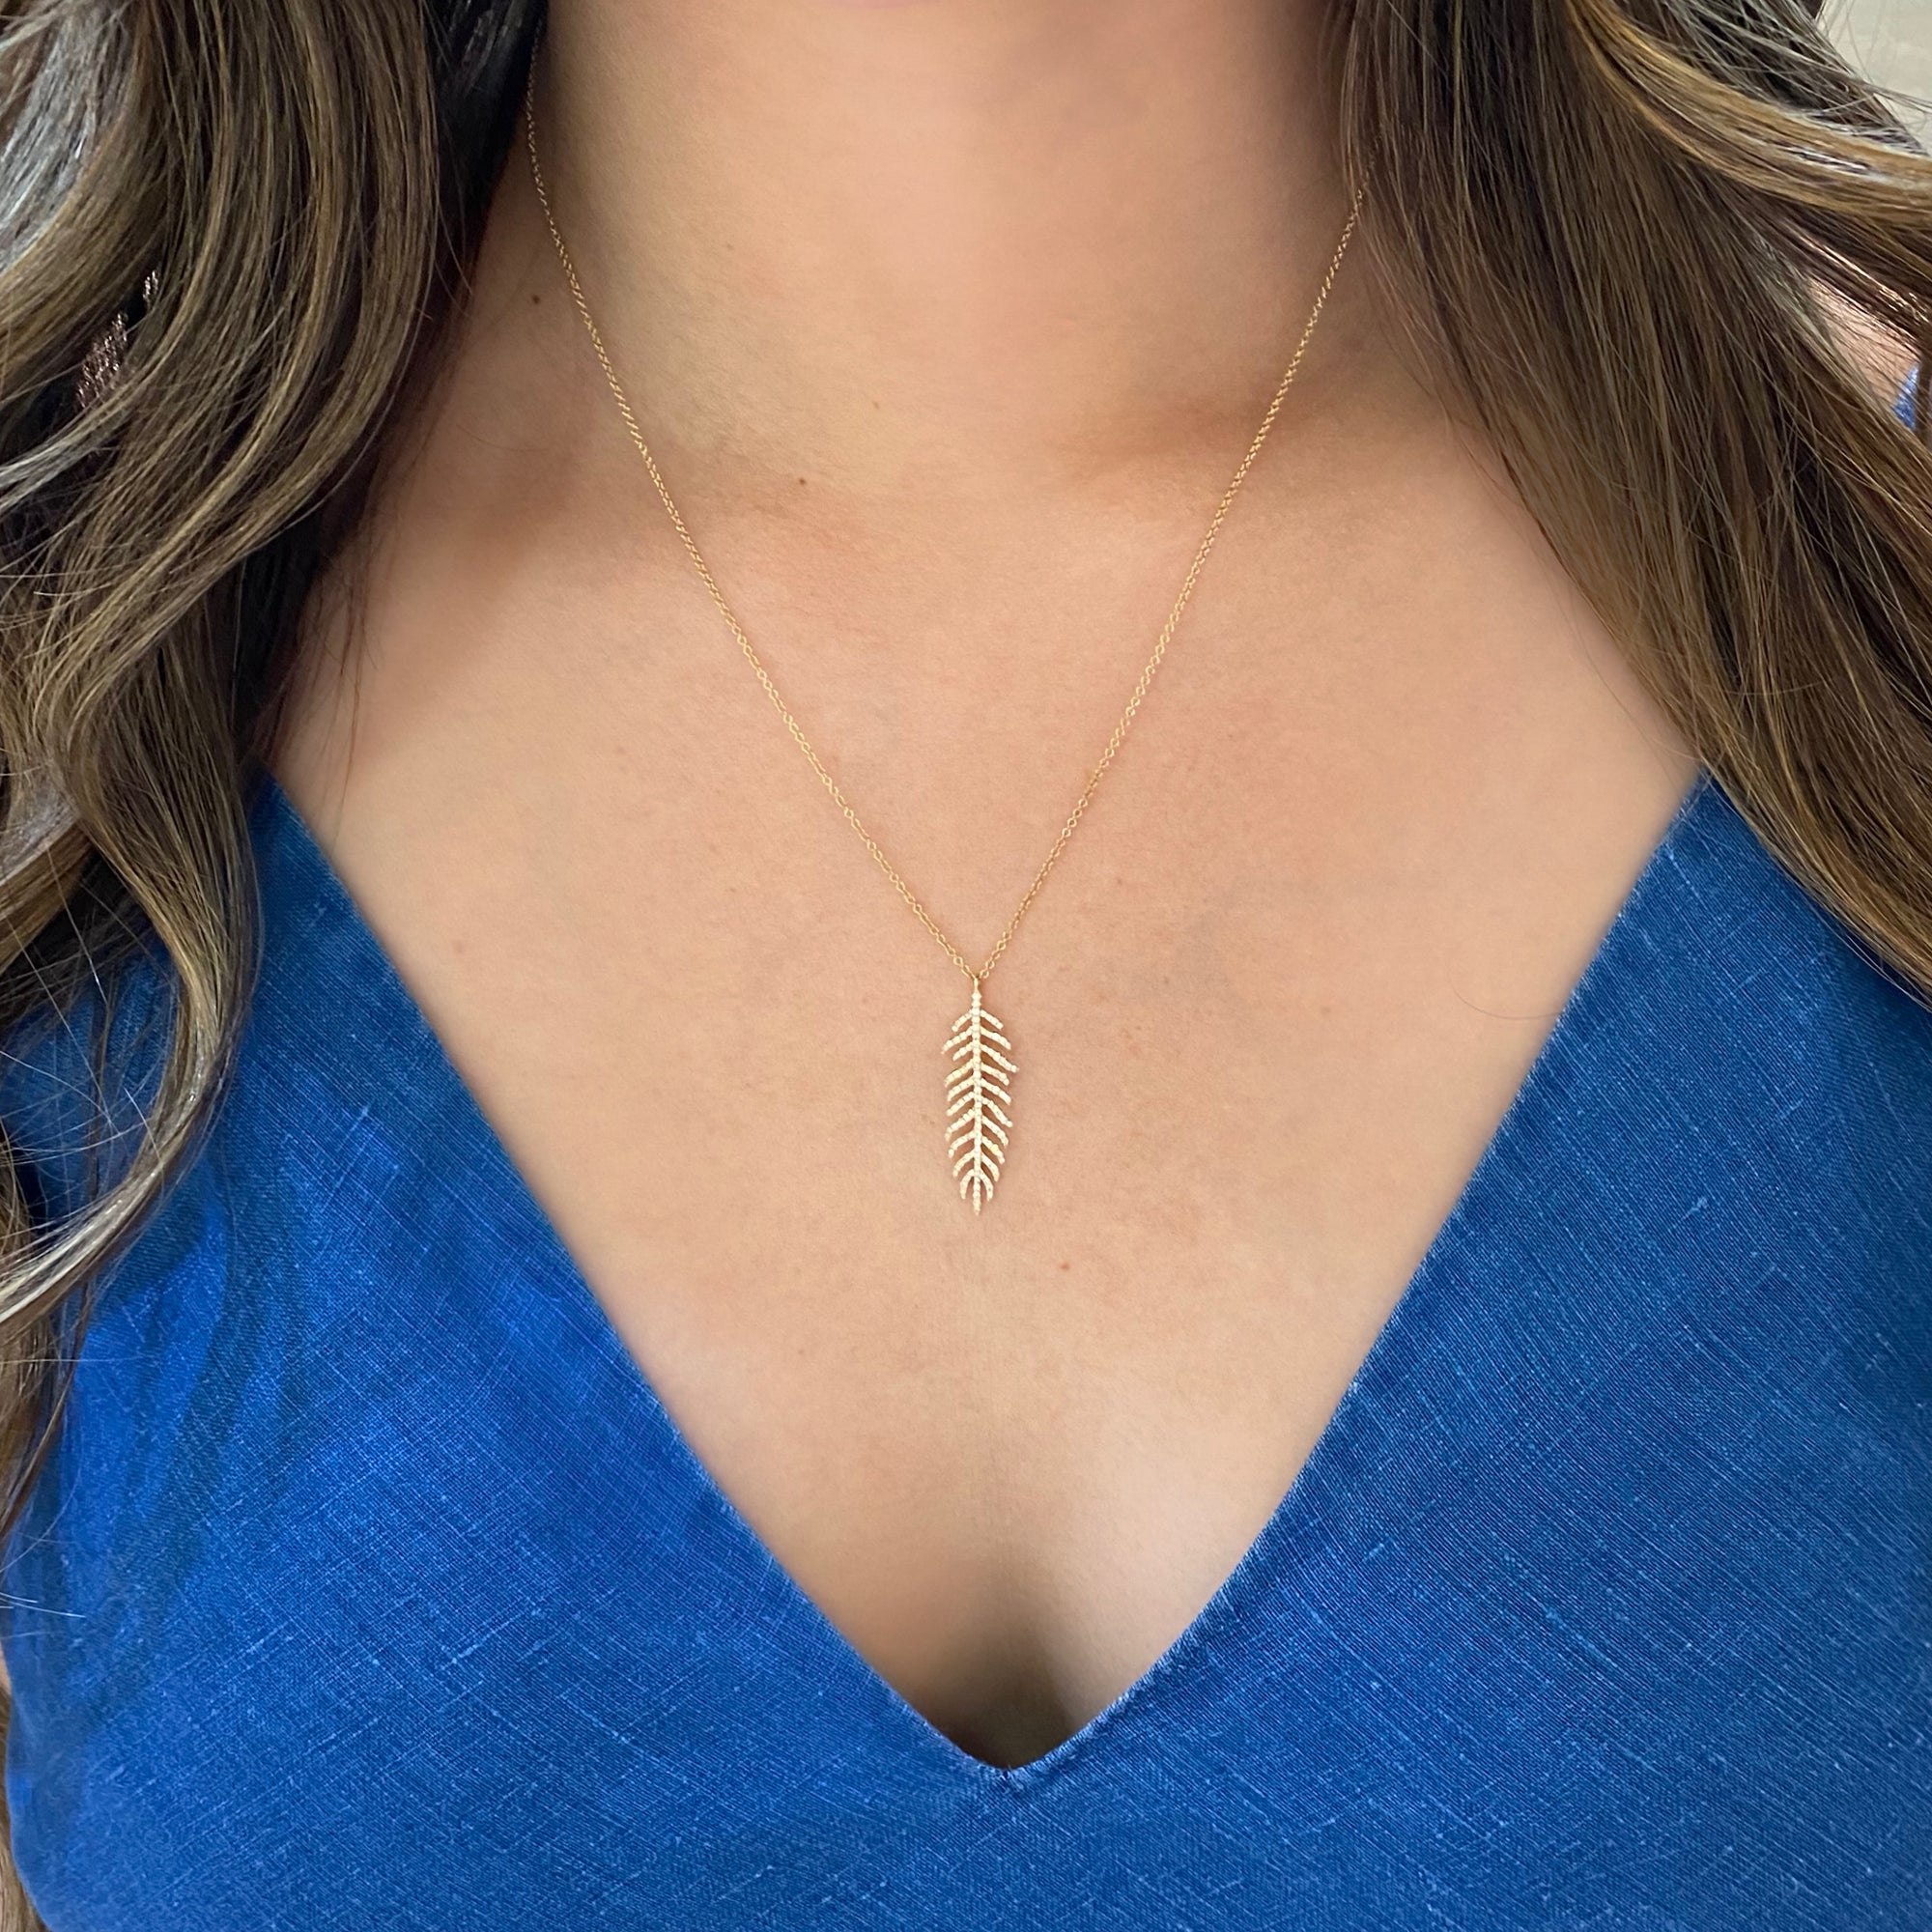 Diamond Feather Pendant Necklace  - 14K gold weighing 2.25 grams.  - 126 round diamonds totaling 0.30 carats.